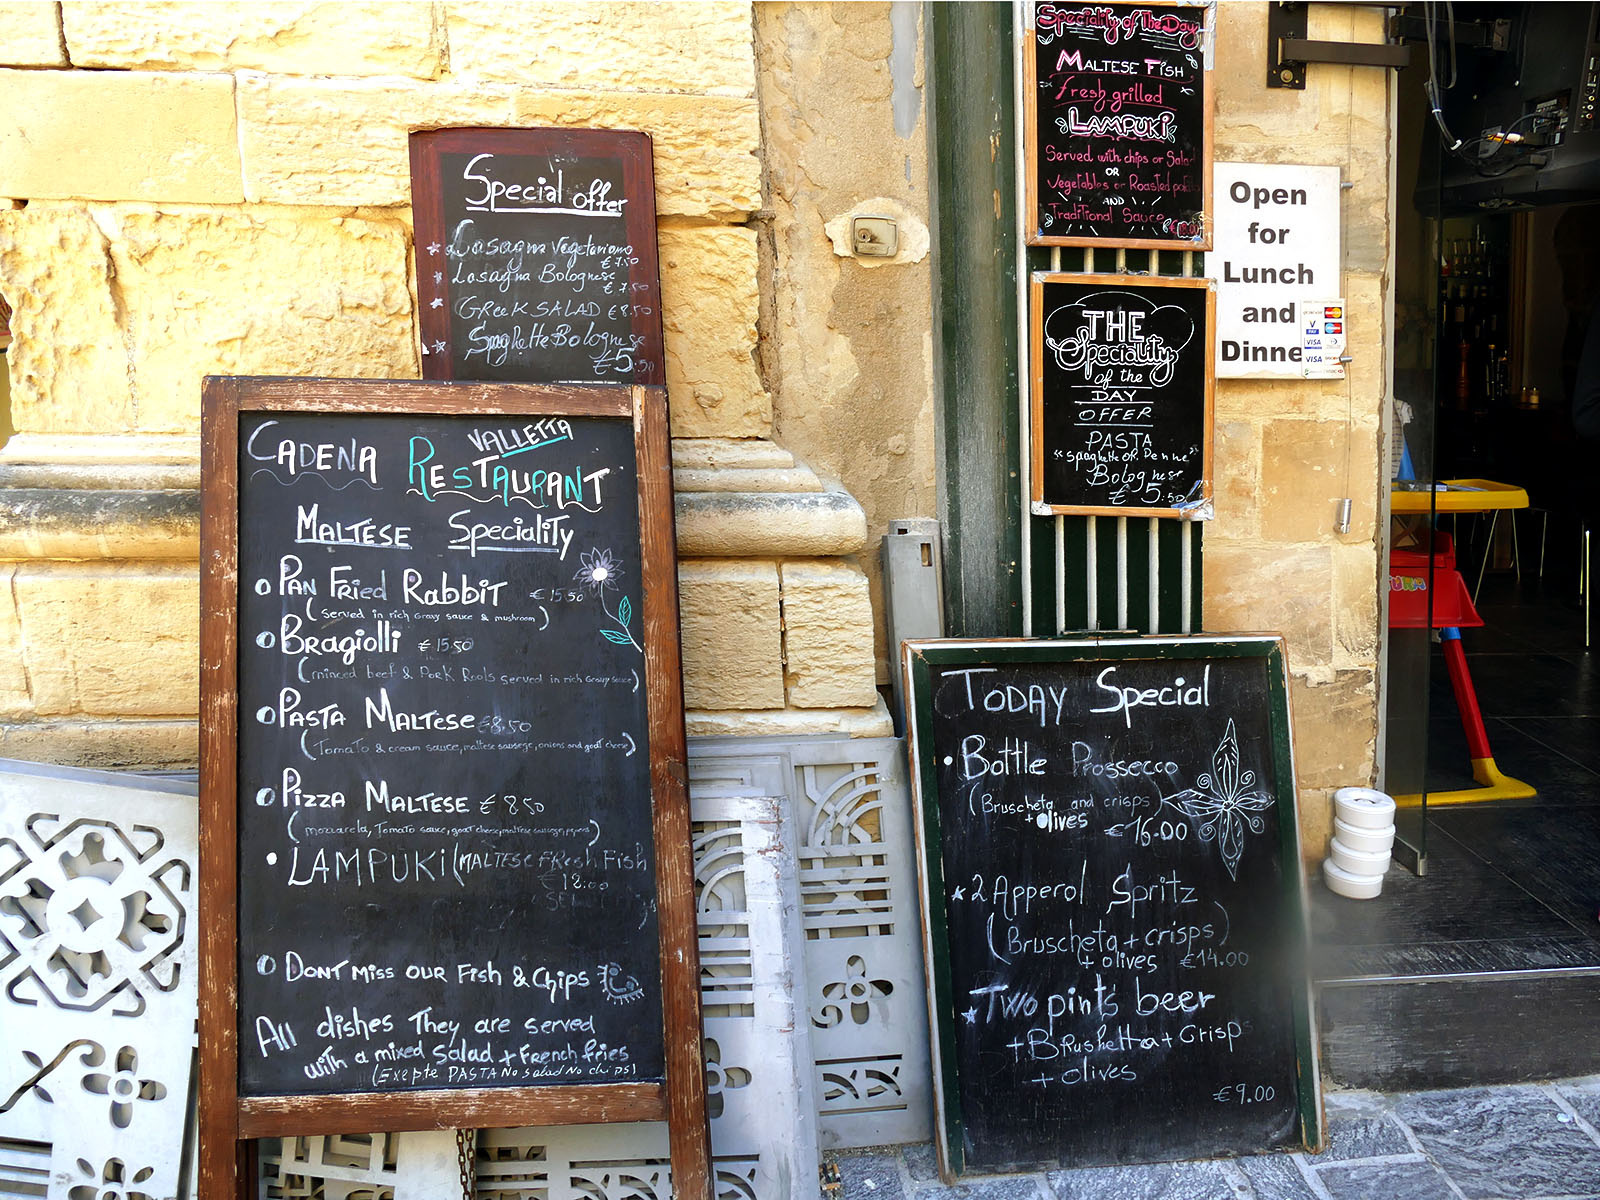 Costa - Valletta - Open for Lunch and Dinner